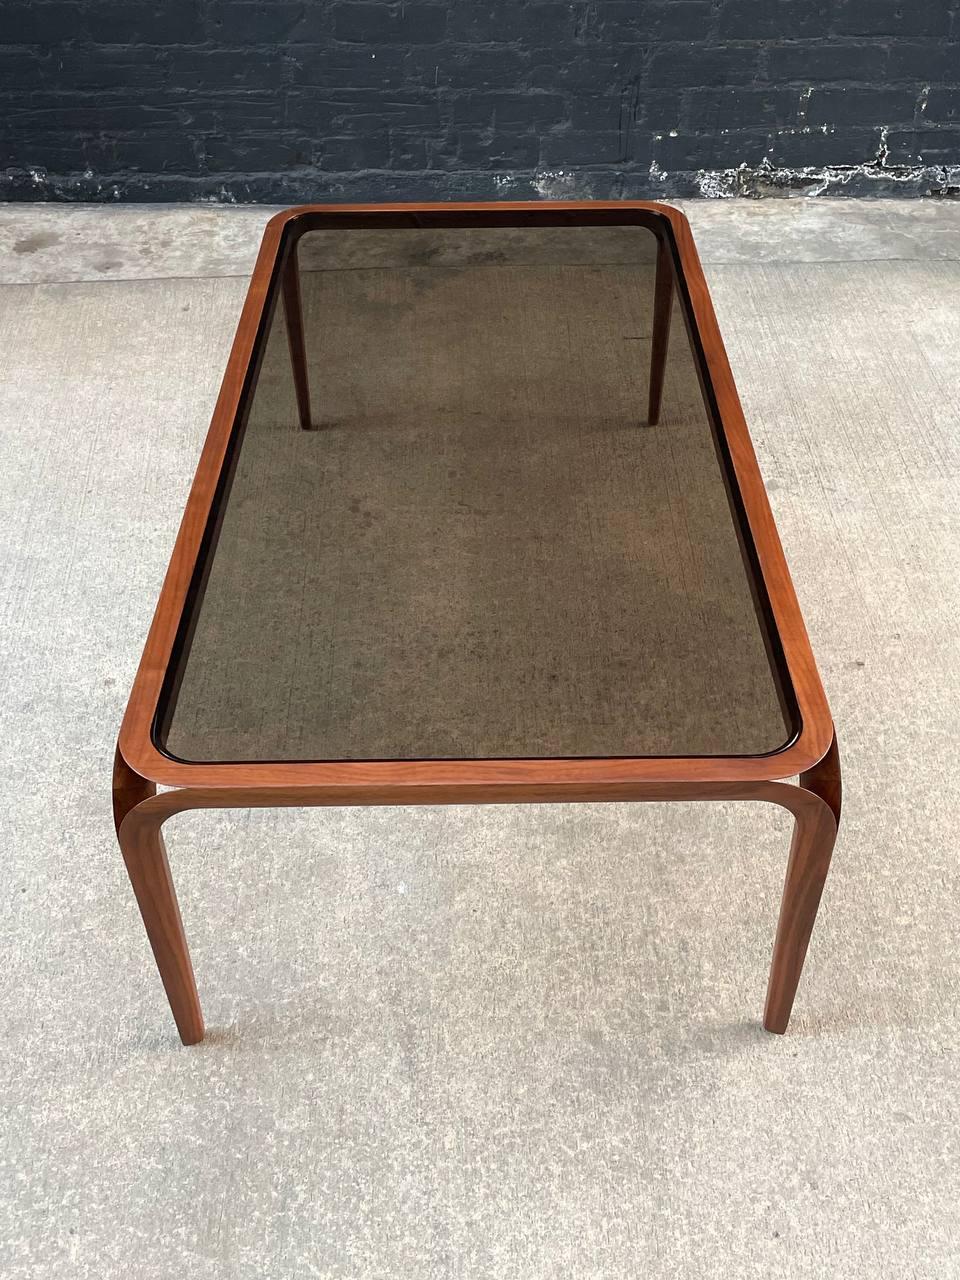 Mid-20th Century Newly Refinished - Mid-Century Modern Sculpted Walnut & Smoke Glass Coffee Table